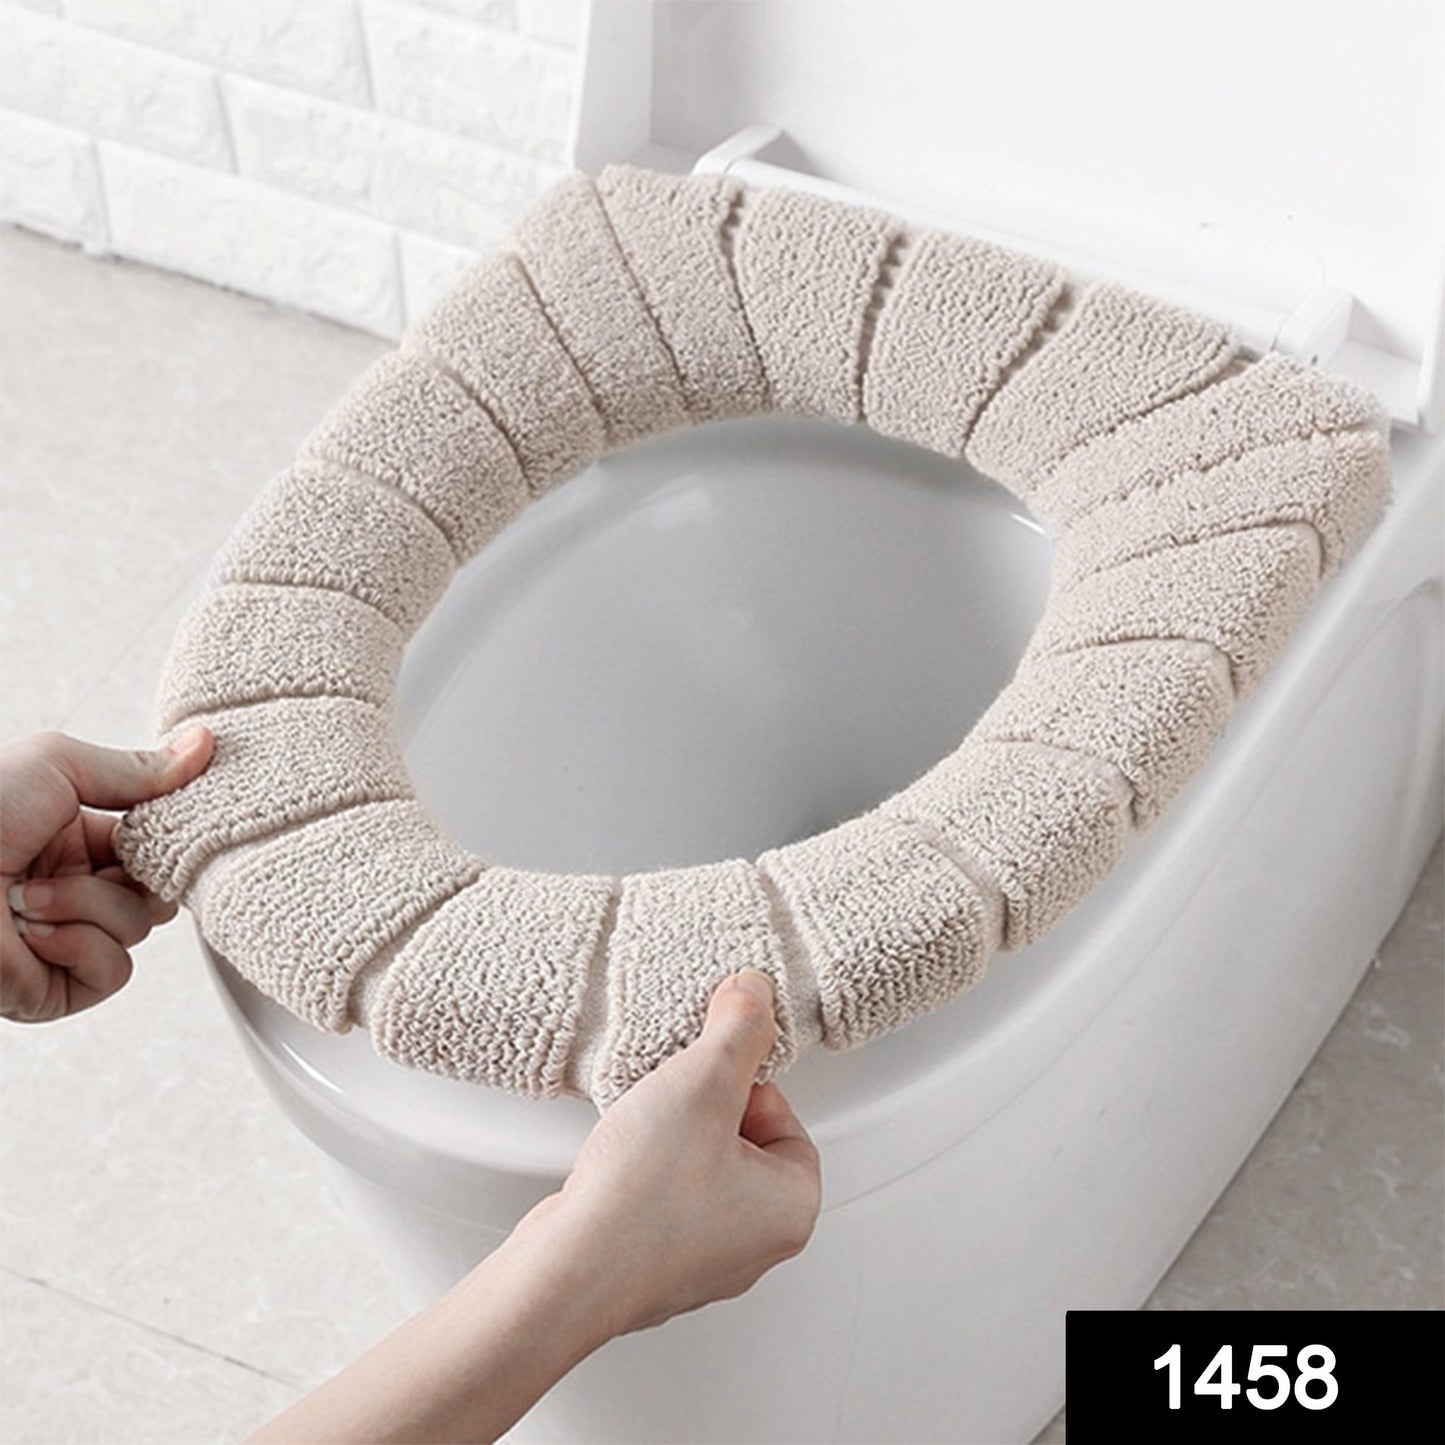 1458 Winter Comfortable Soft Toilet Seat Mat Cover Pad Cushion Plush - SWASTIK CREATIONS The Trend Point SWASTIK CREATIONS The Trend Point